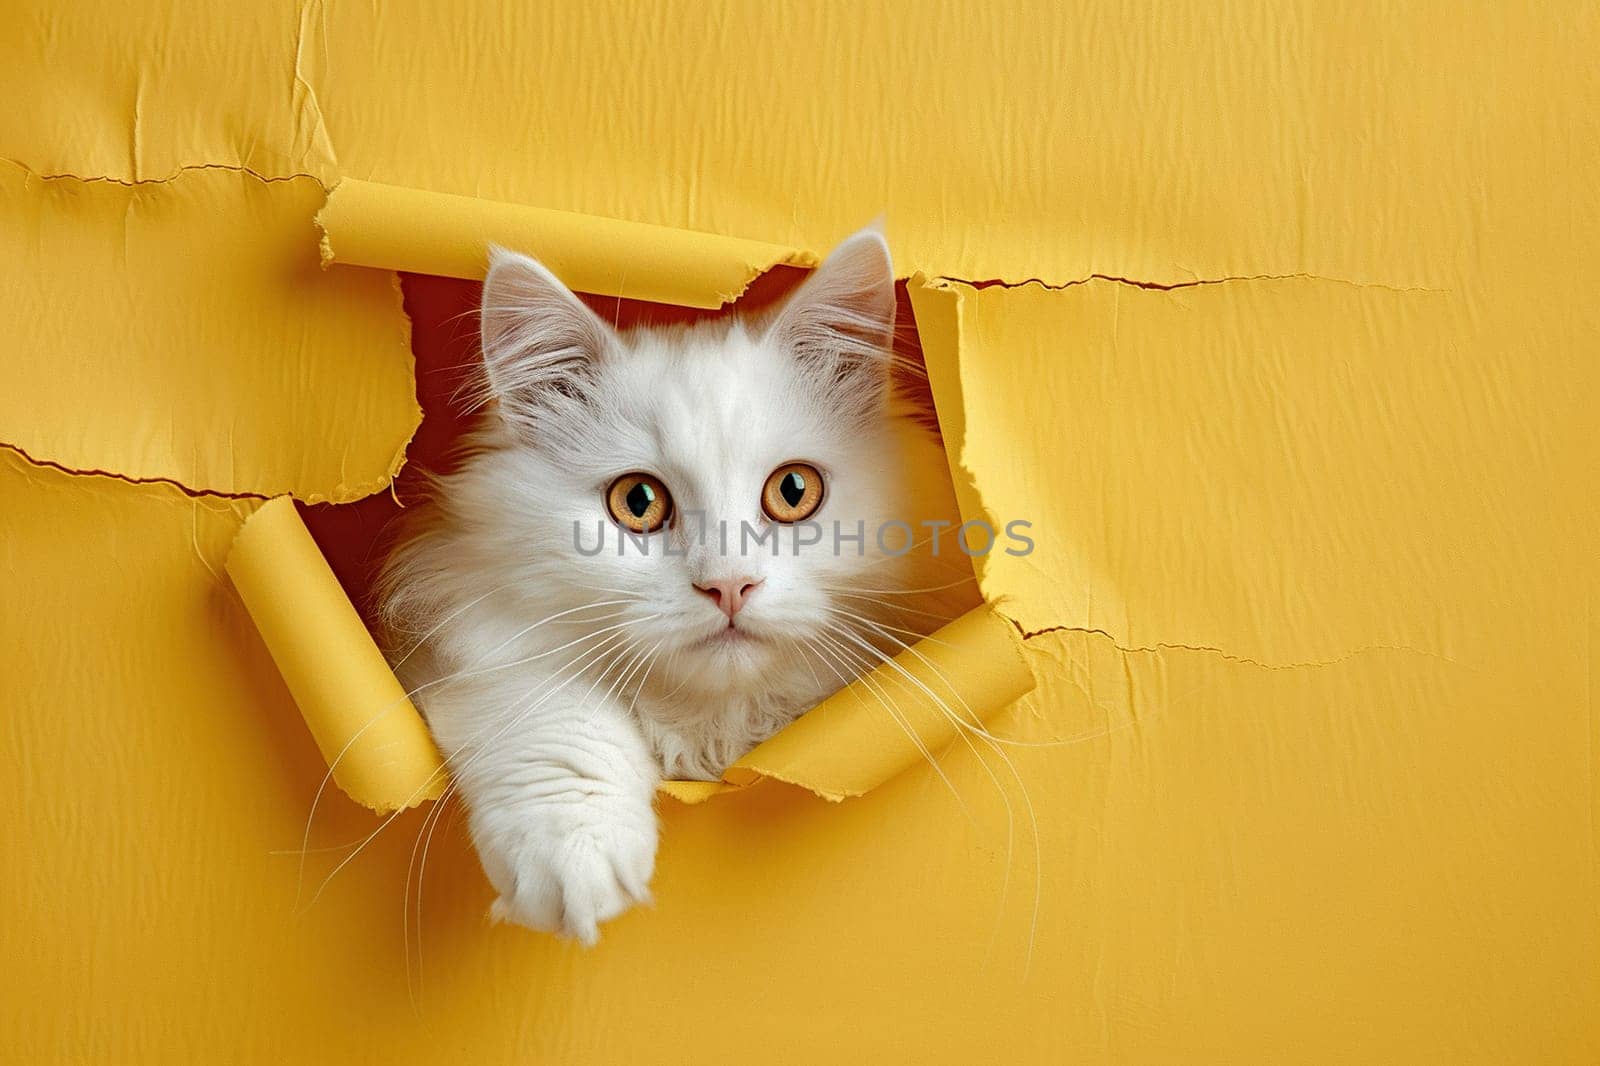 A fluffy white cat looks through a hole in yellow paper.